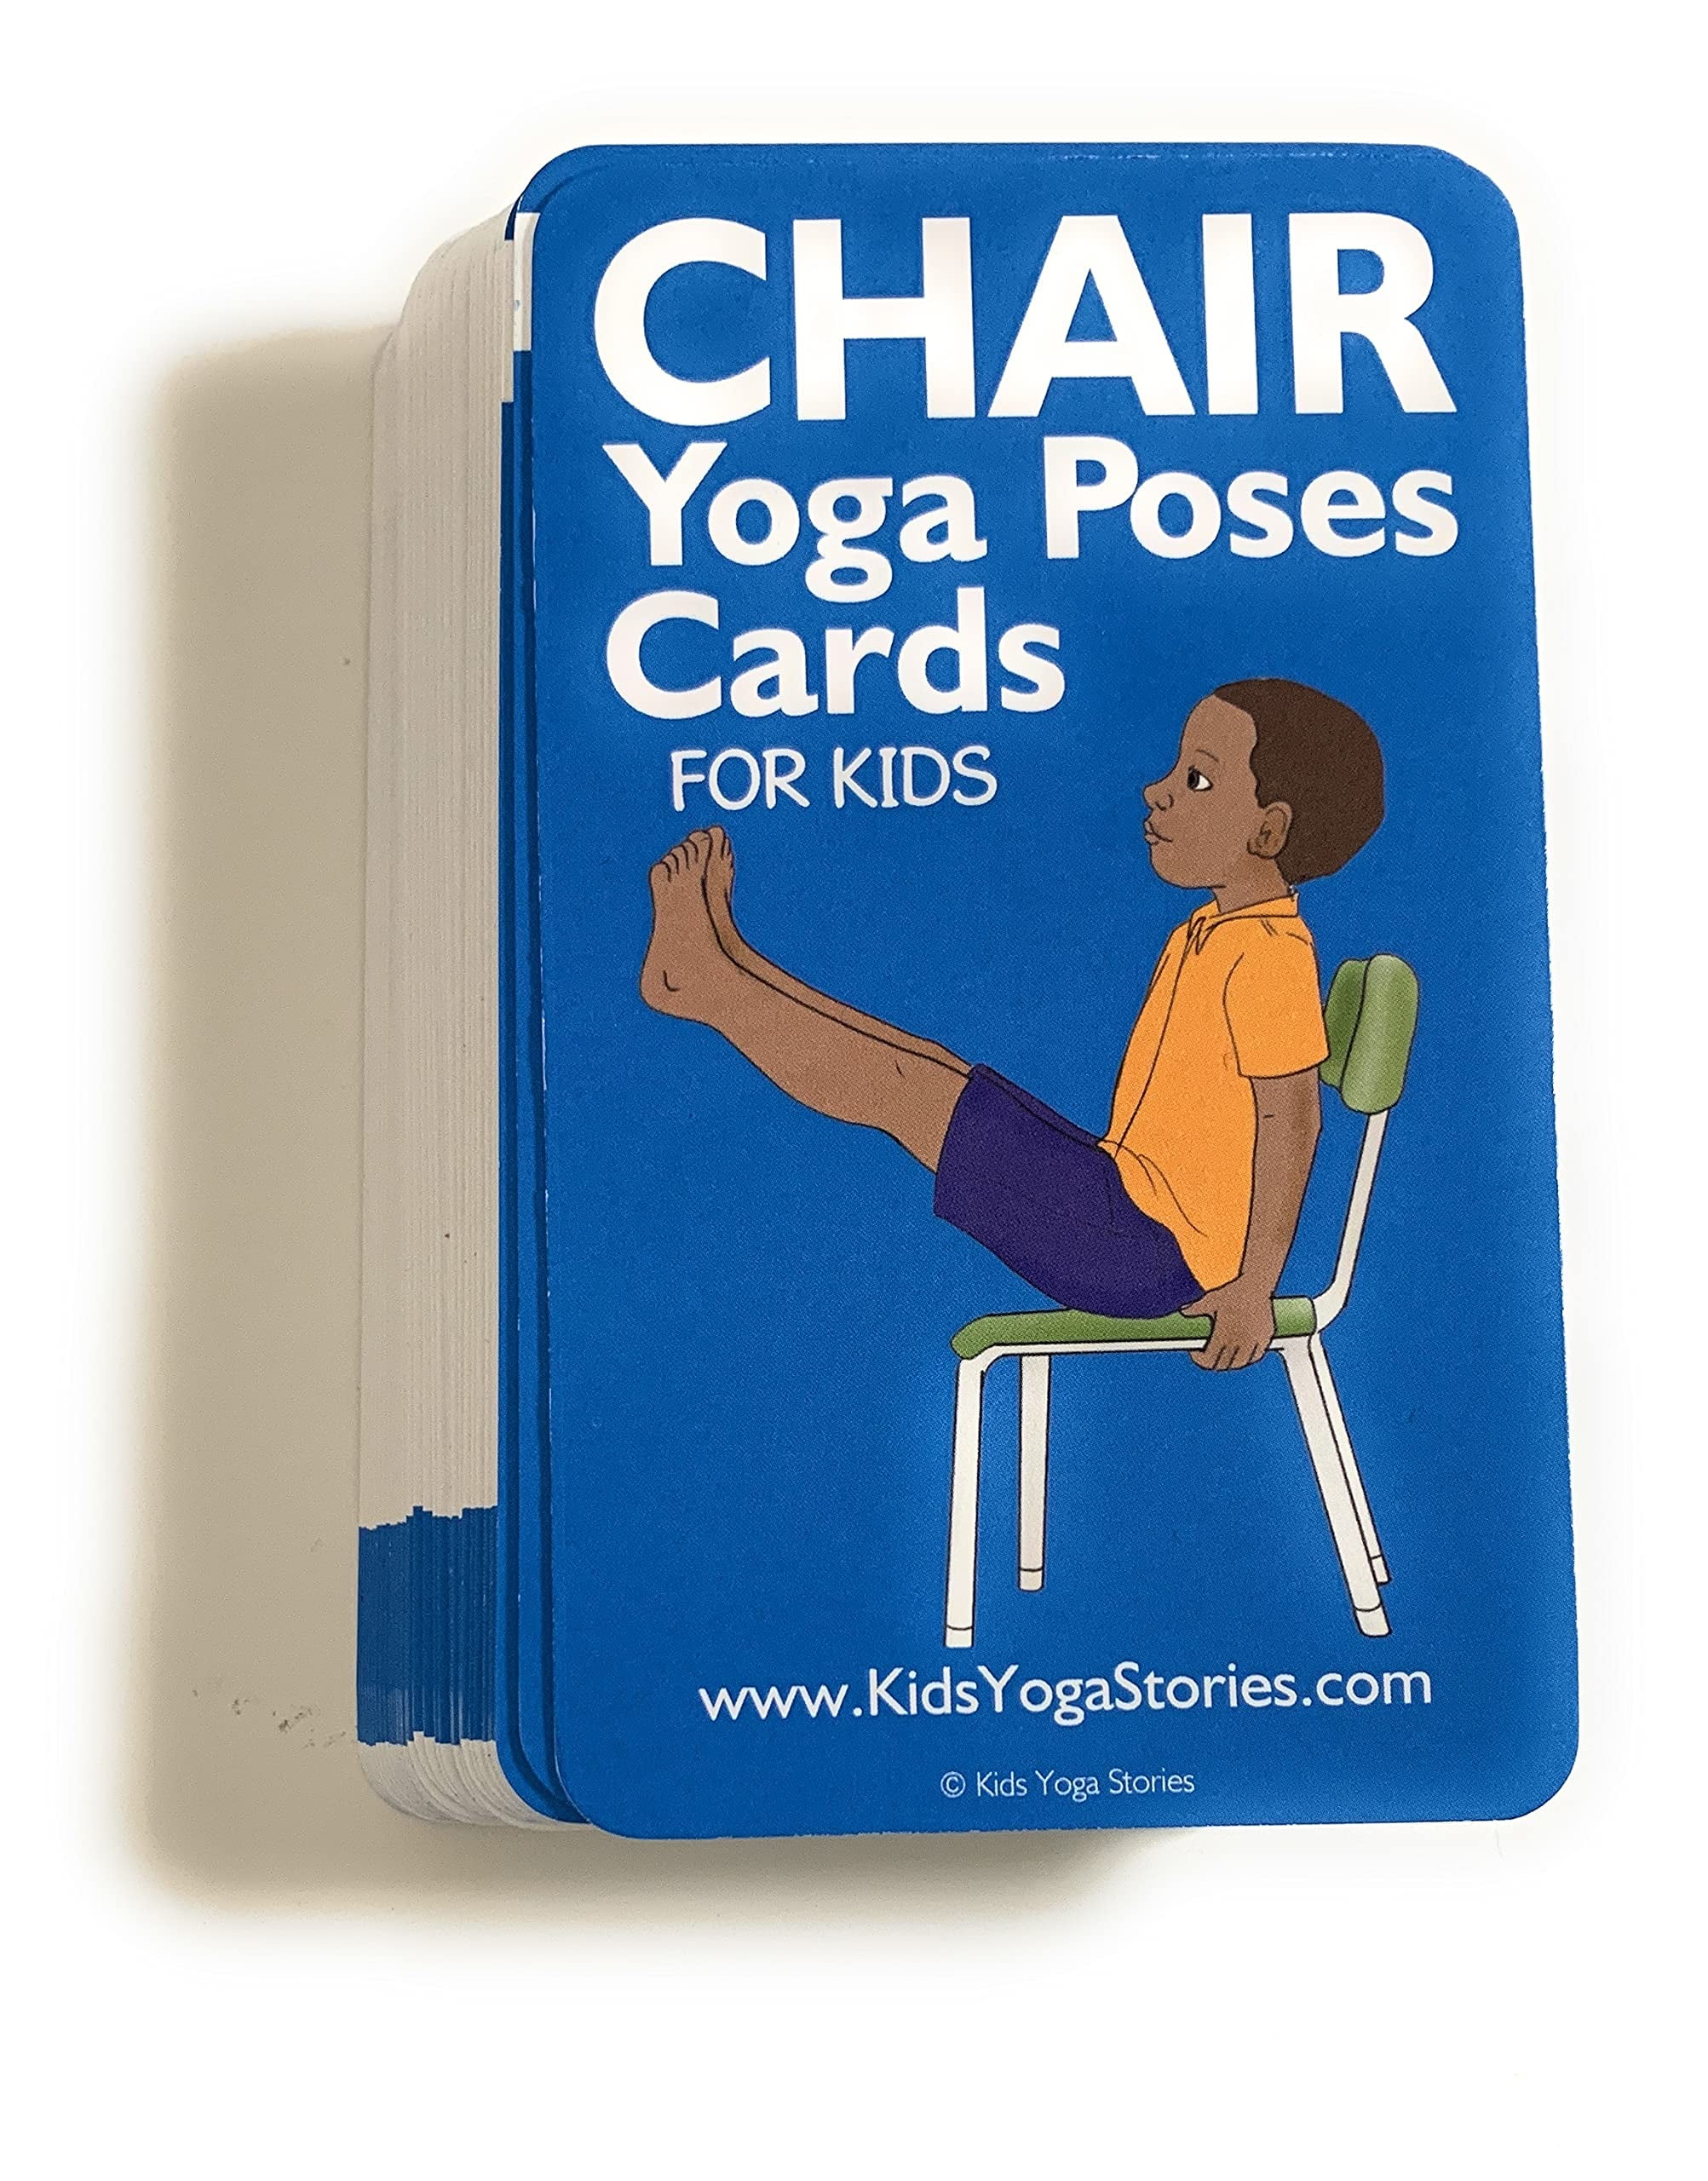 Kids Yoga Stories - Download your FREE growth mindset yoga poster today!  It's a great tool to reinforce the ideas of growth mindset by practicing  daily affirmations through yoga poses.  https://www.kidsyogastories.com/growth-mindset/ |